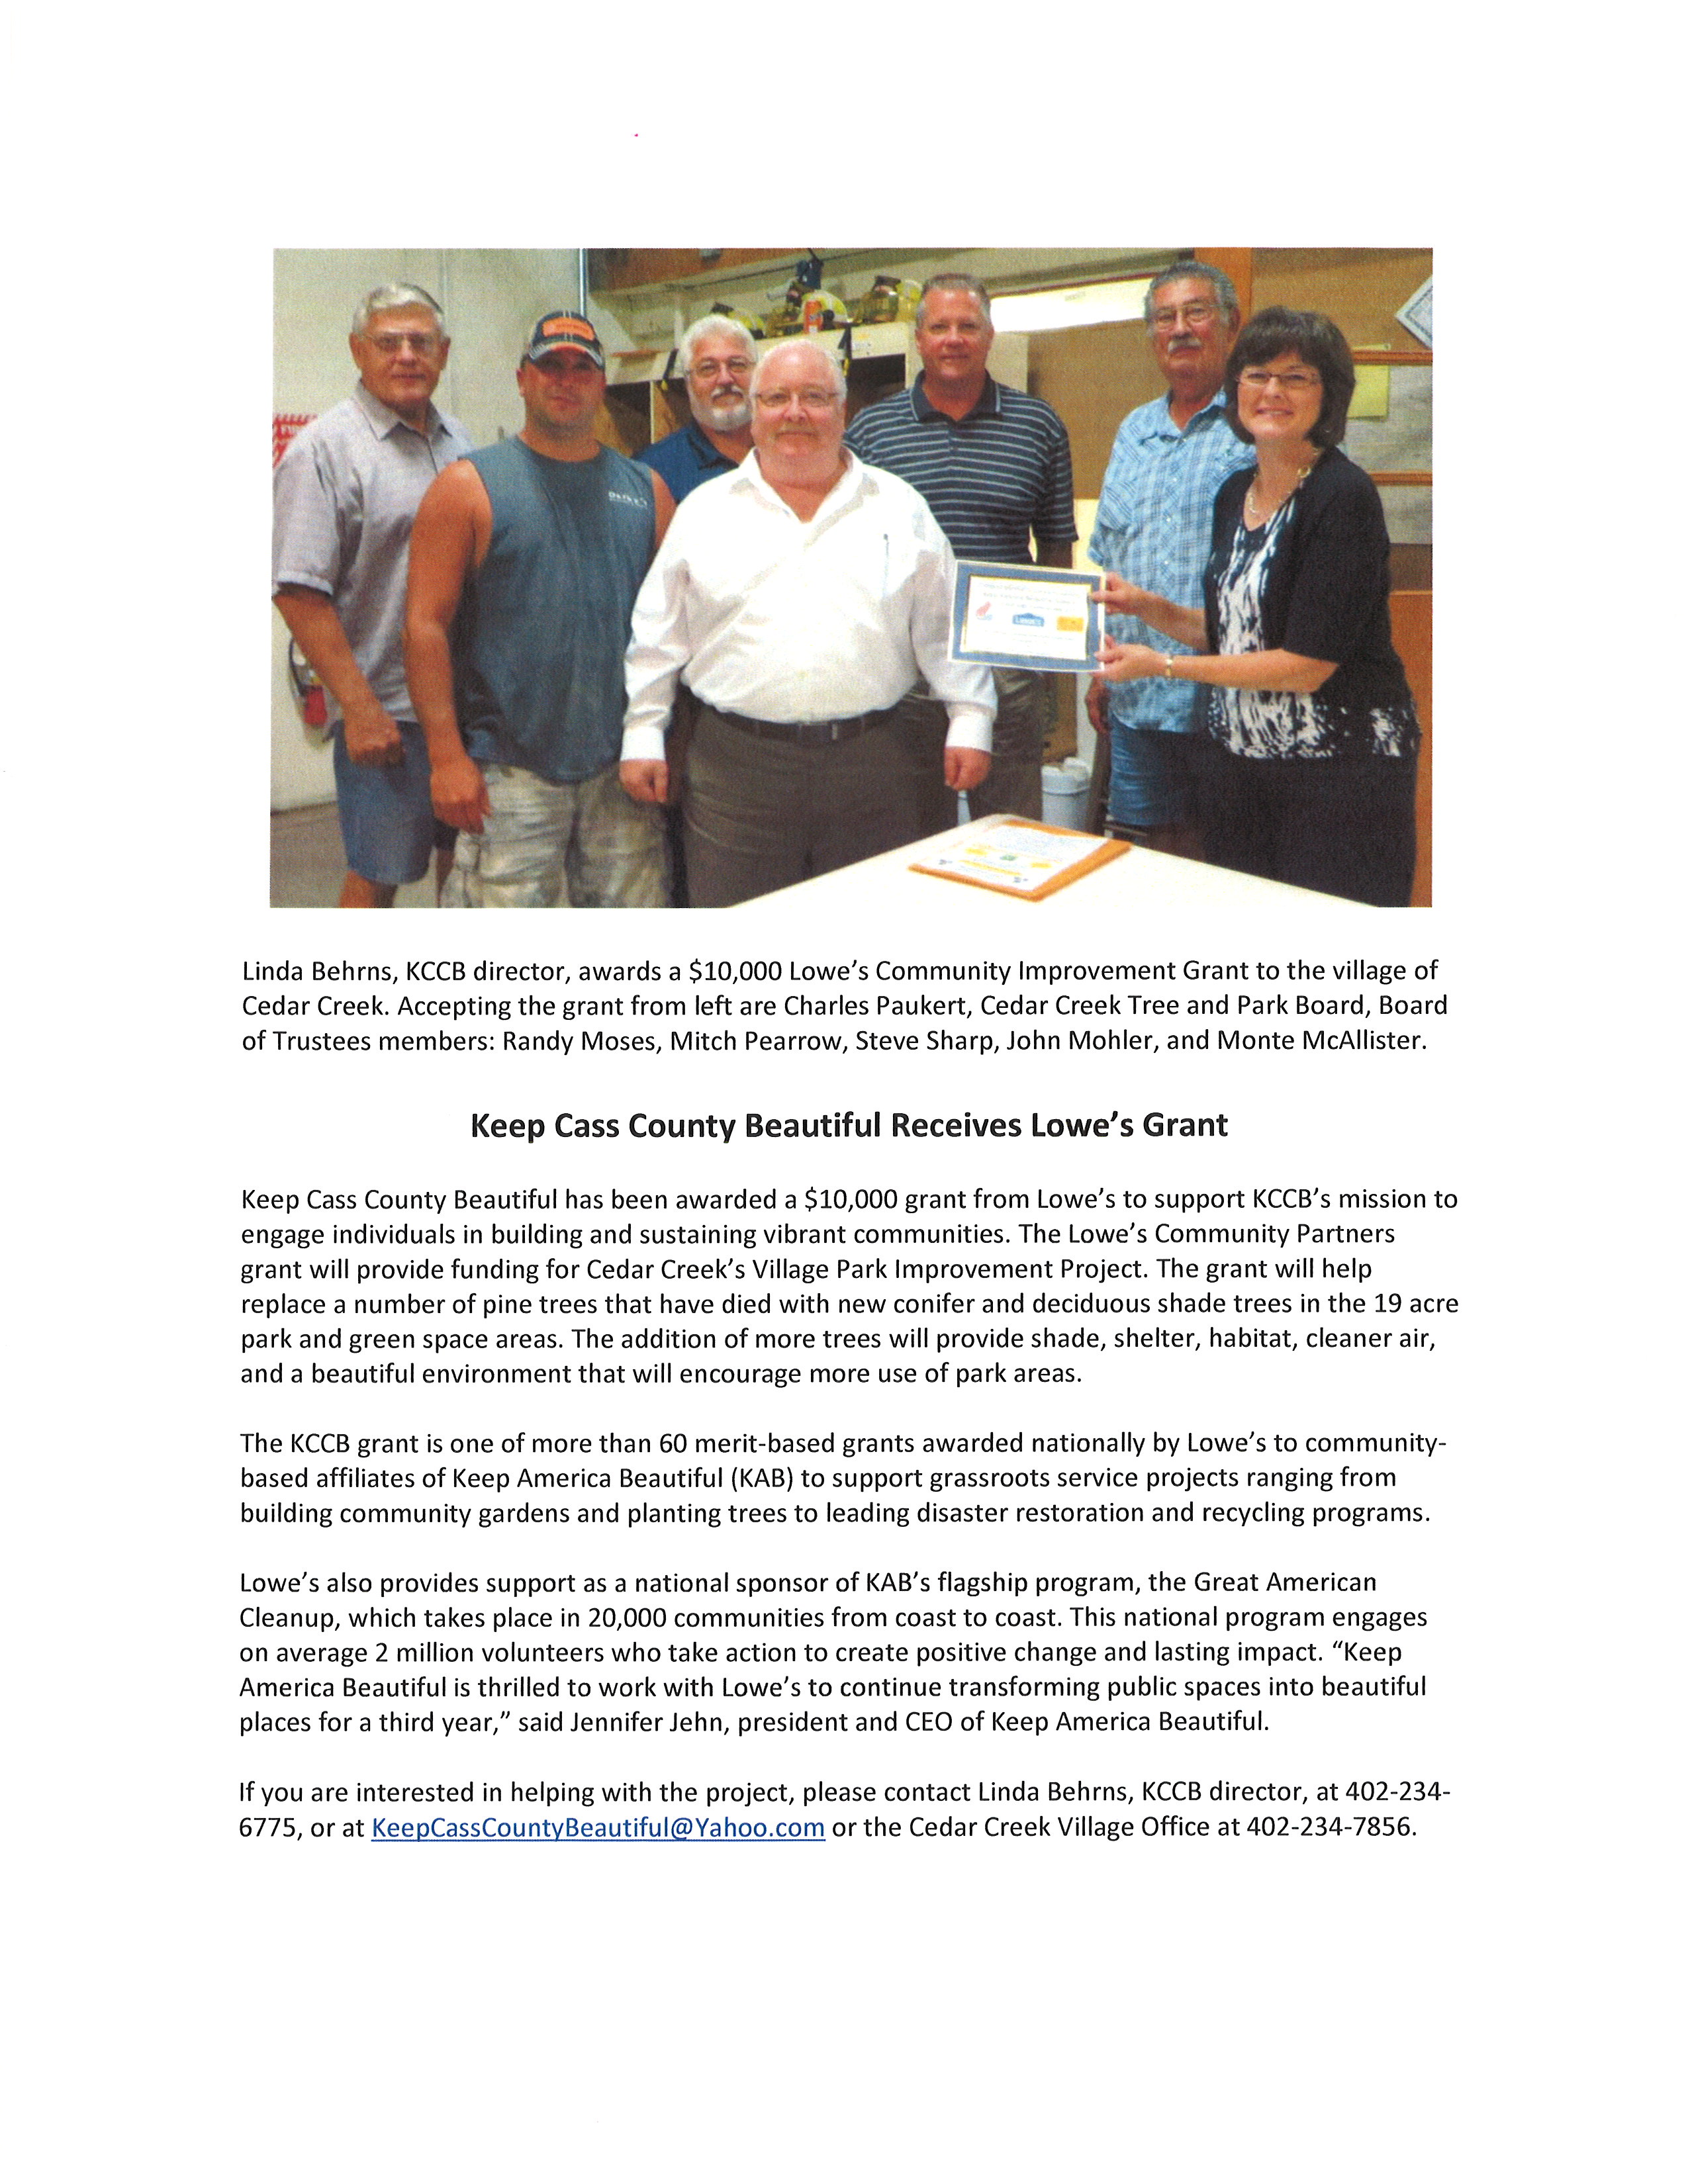 KCCB Lowes news release